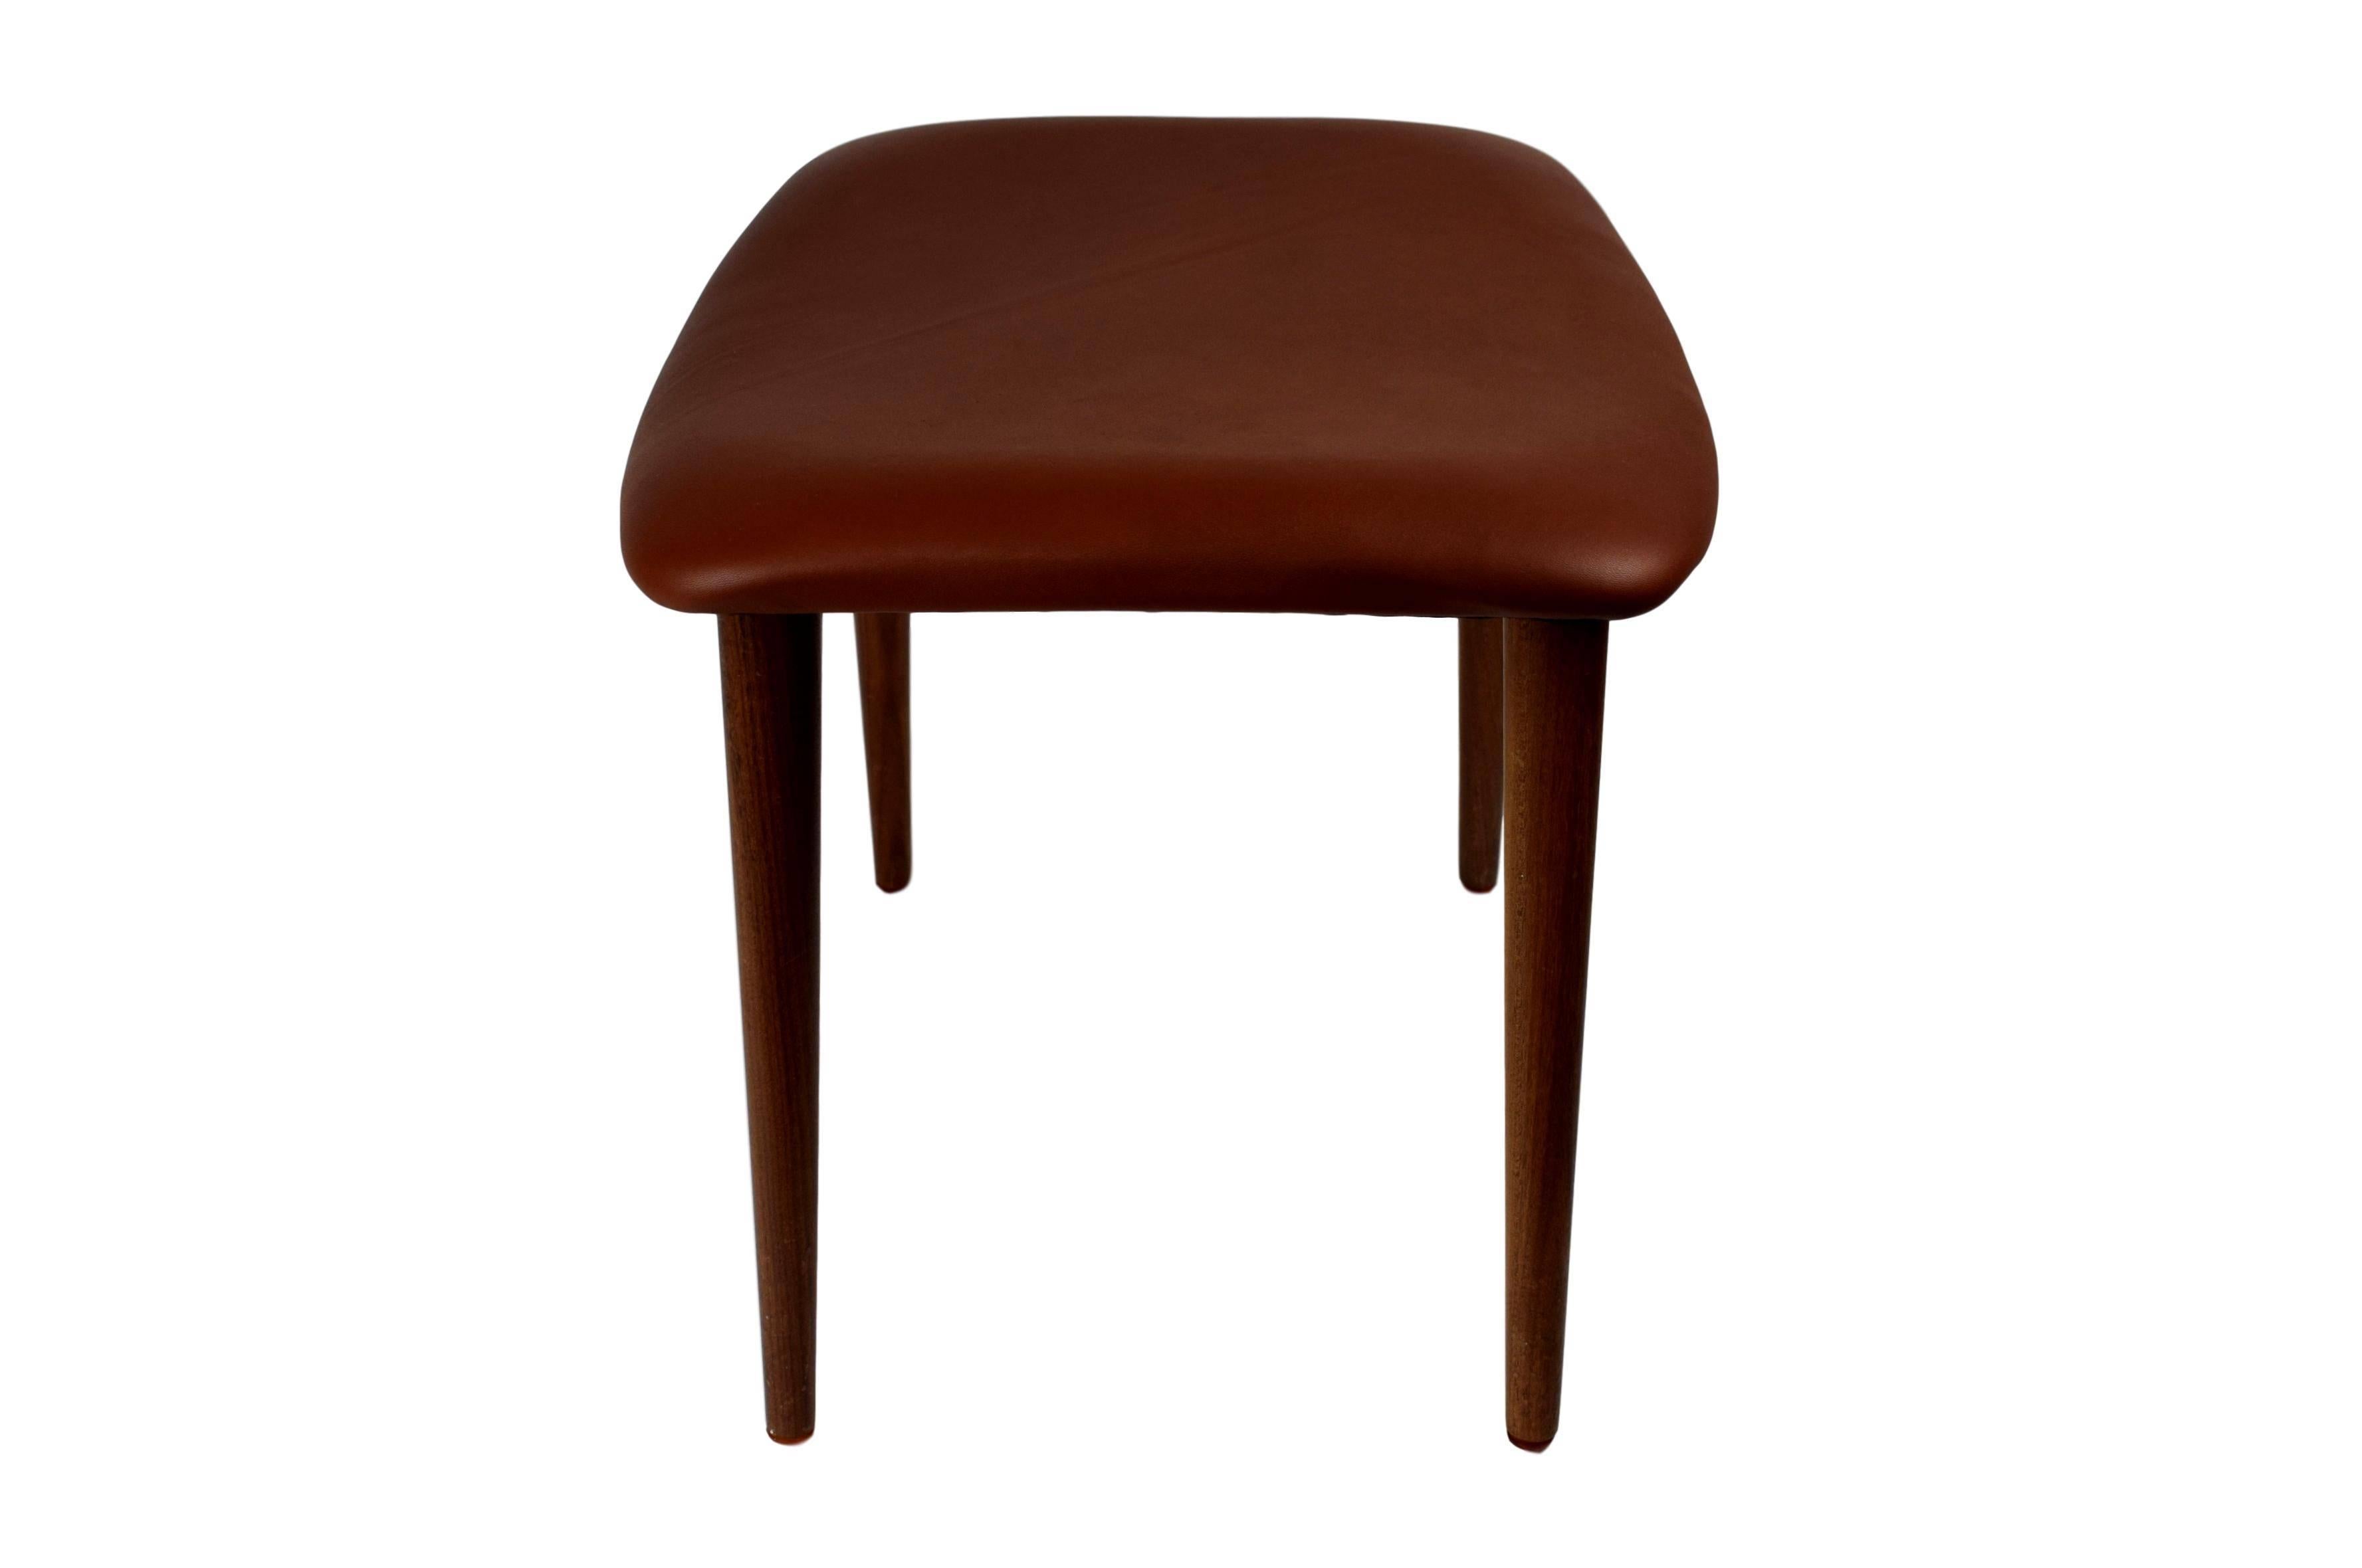 Mid-20th Century Danish Midcentury Teak Ottoman Upholstered with Brown Aniline Leather For Sale